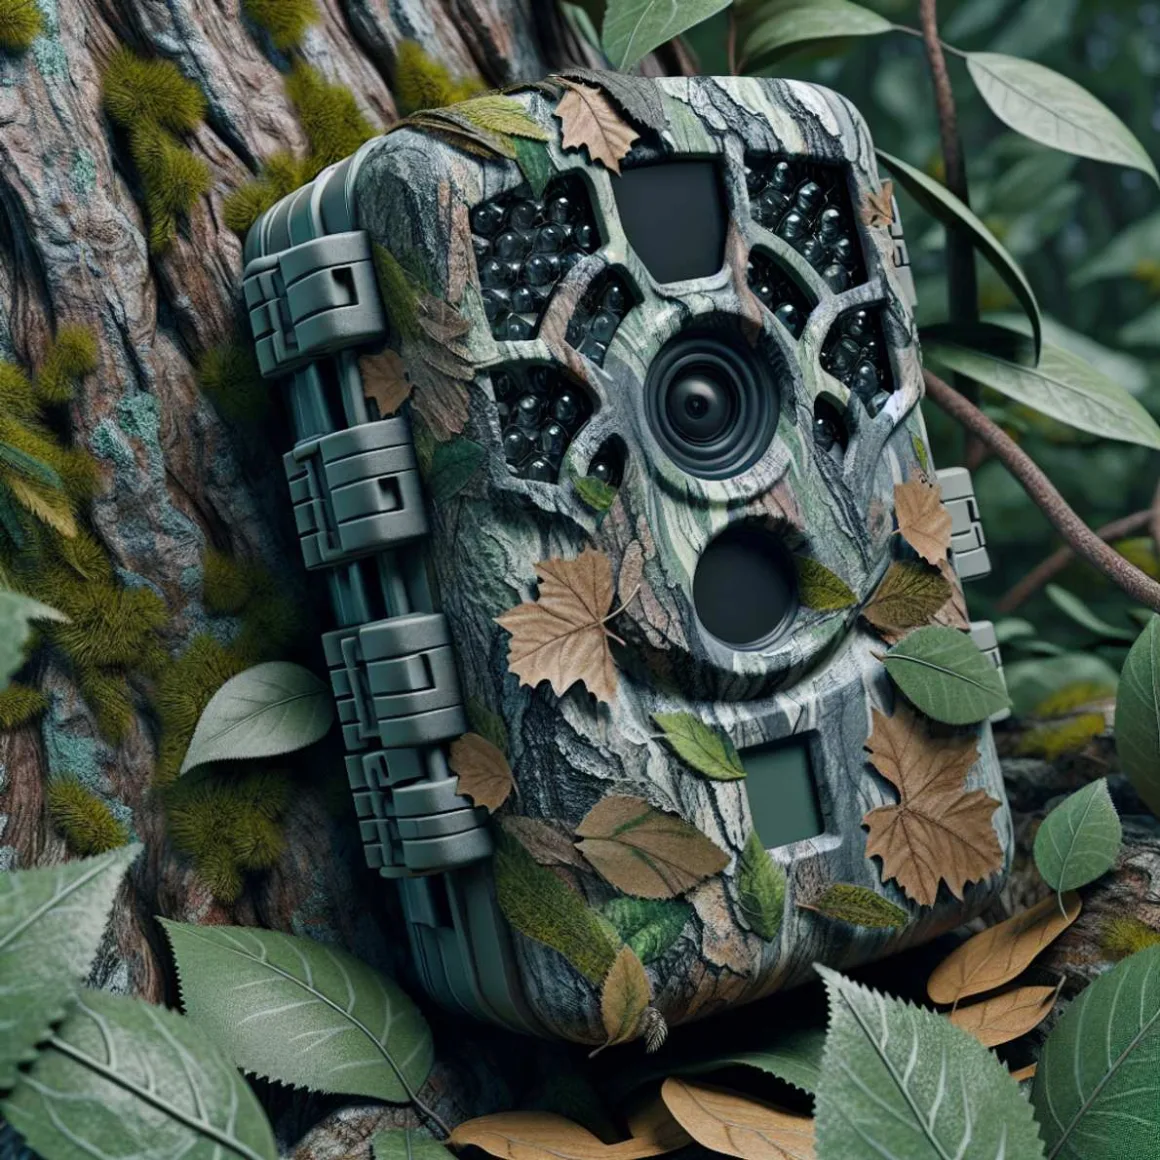 A trail camera cleverly concealed in natural environment.